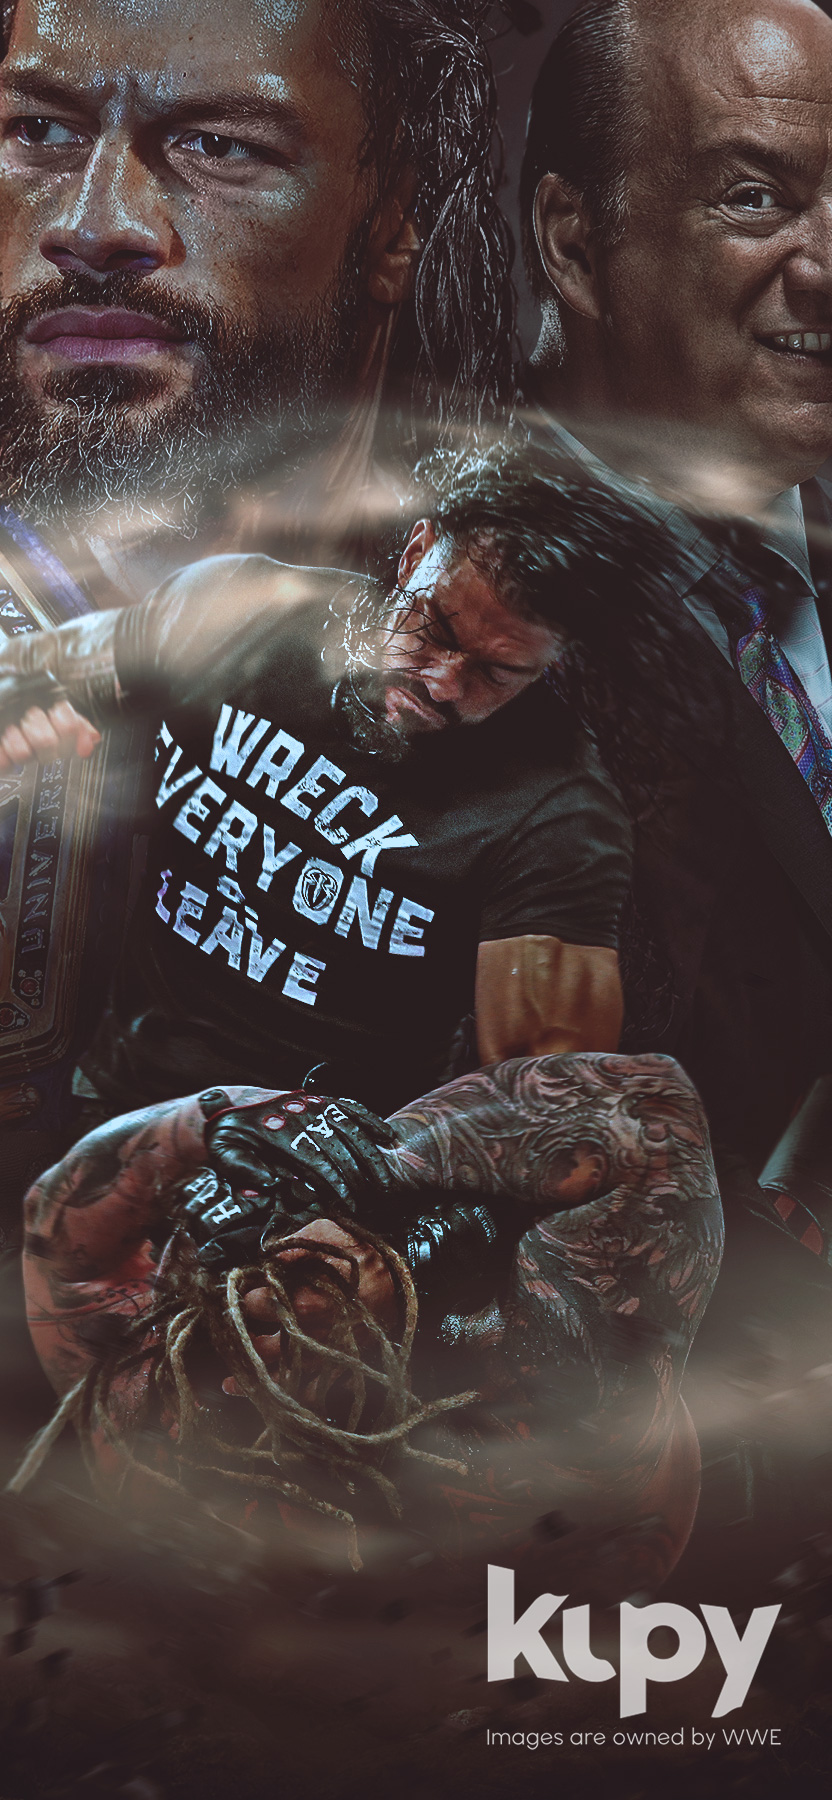 Roman Reigns Archives - Page 3 of 6 - Kupy Wrestling Wallpapers